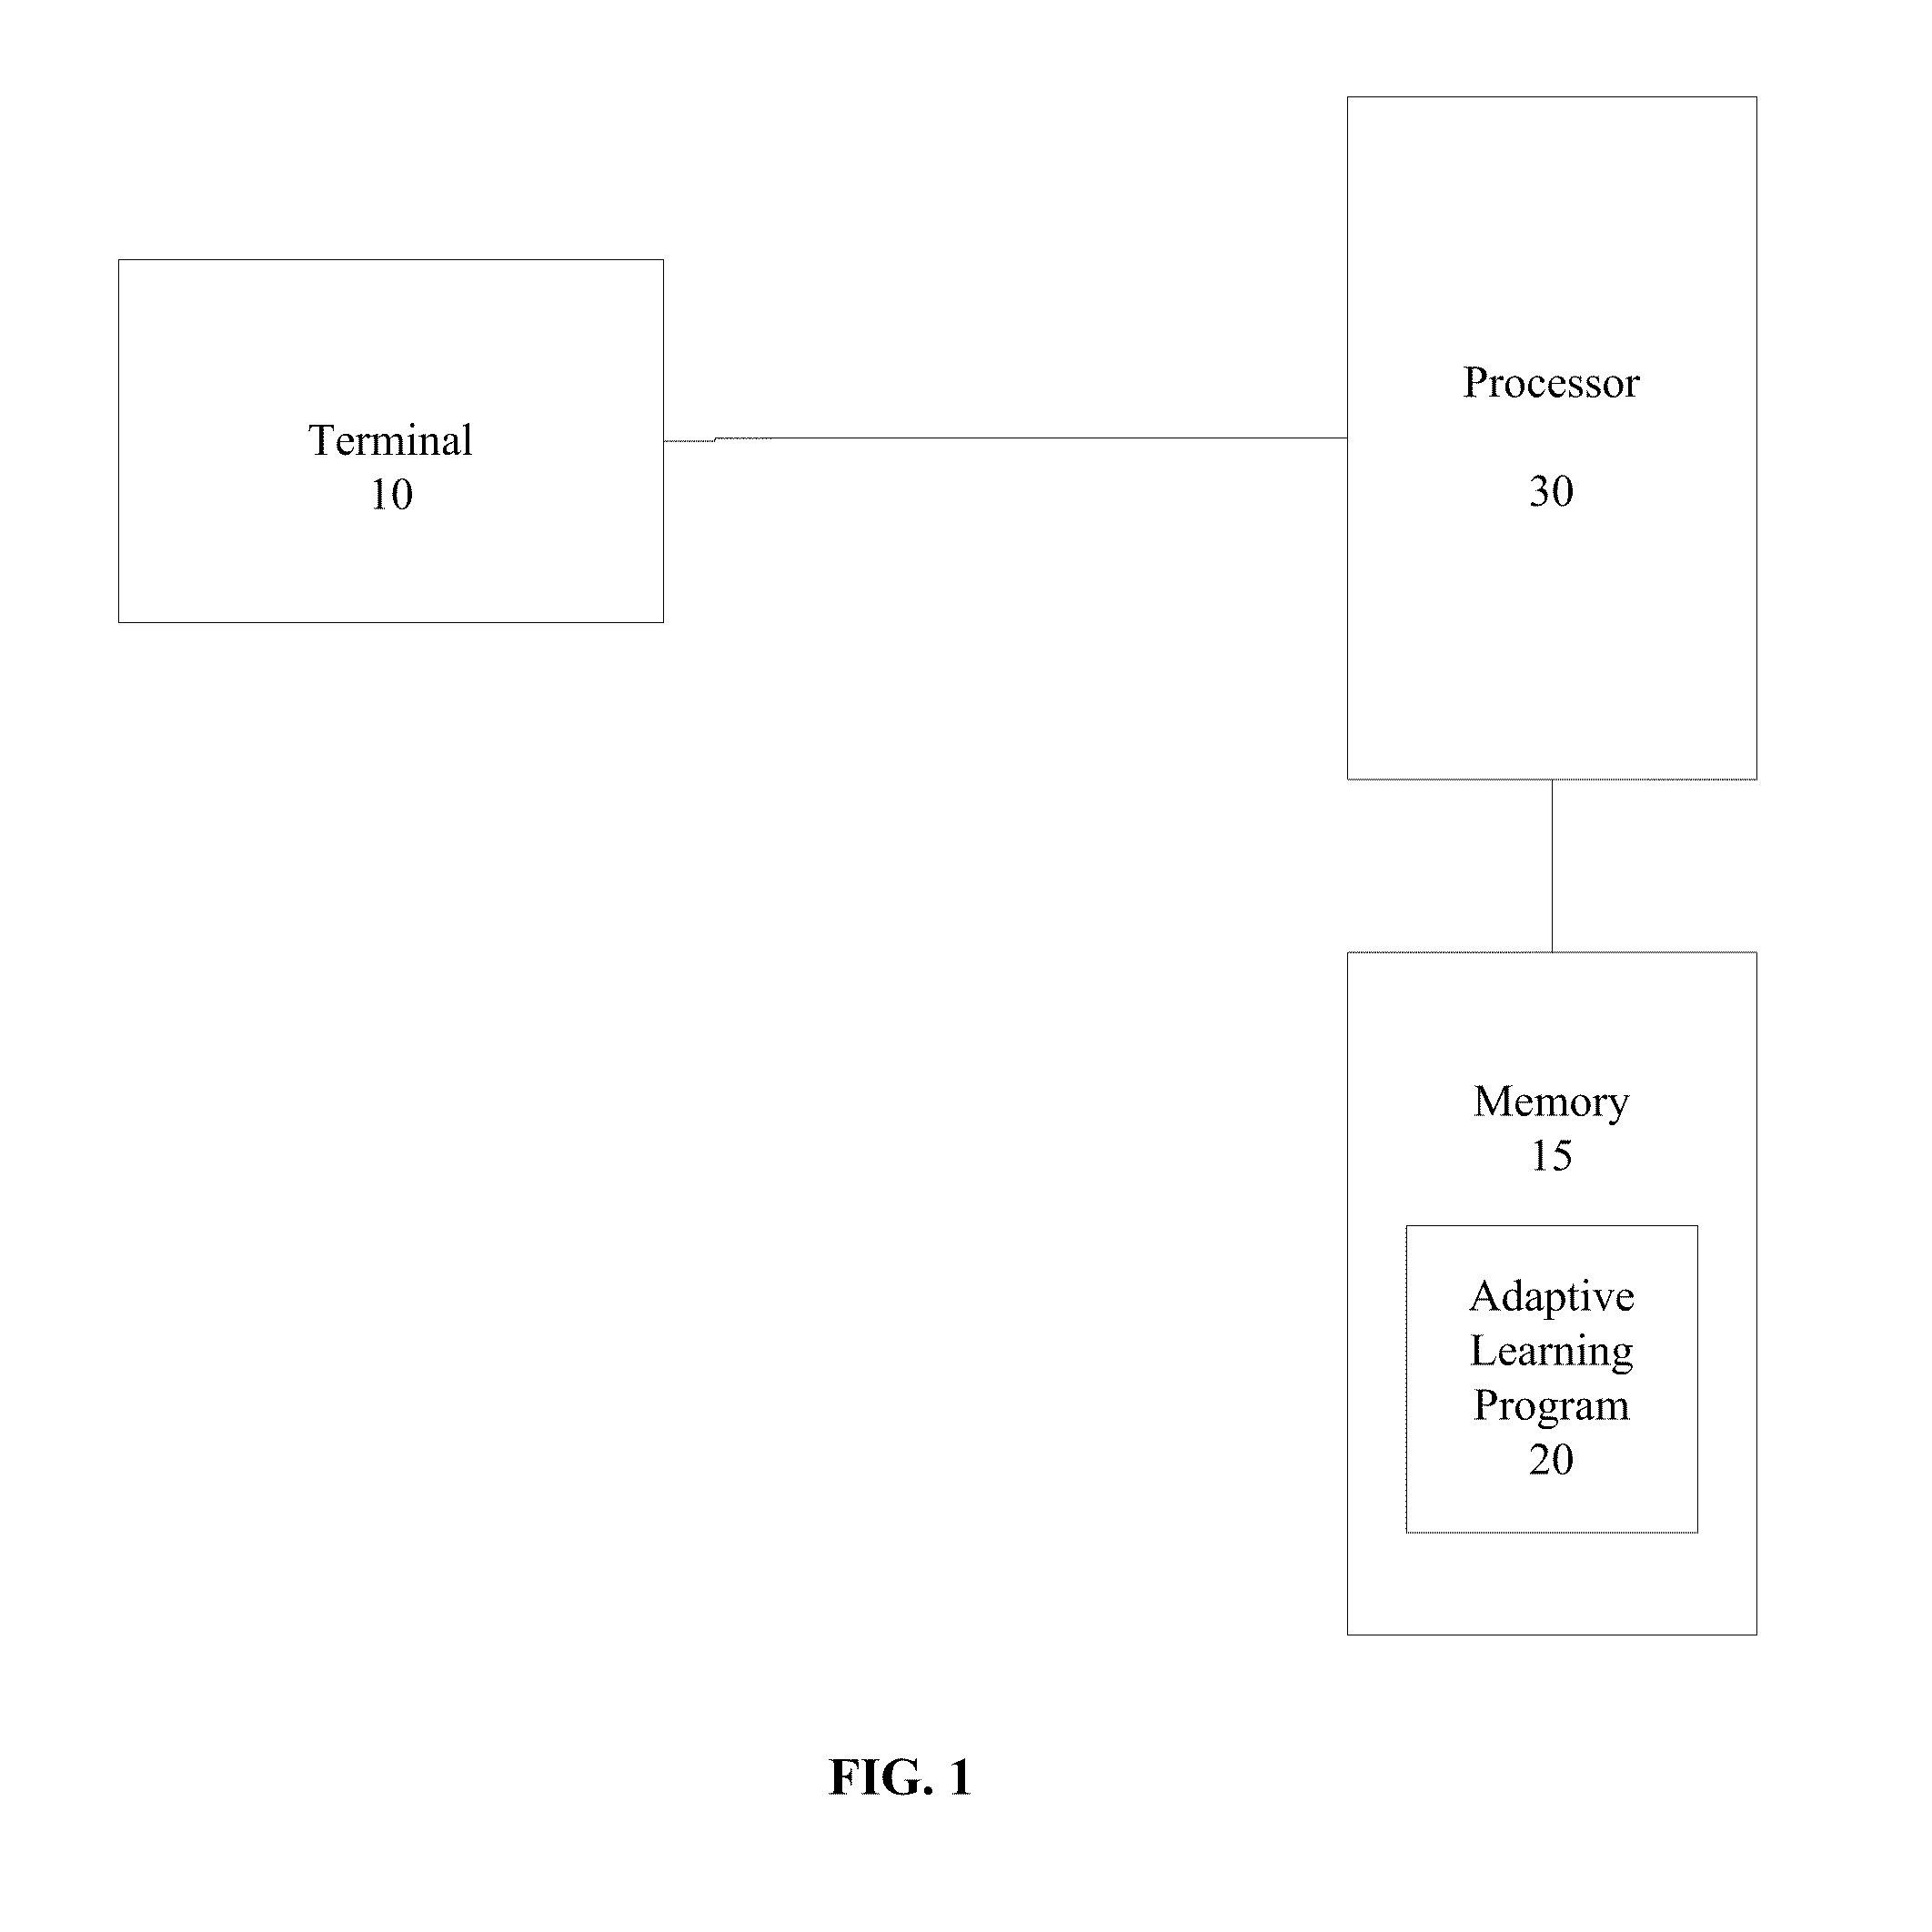 System and method for generating questions and multiple choice answers to adaptively aid in word comprehension